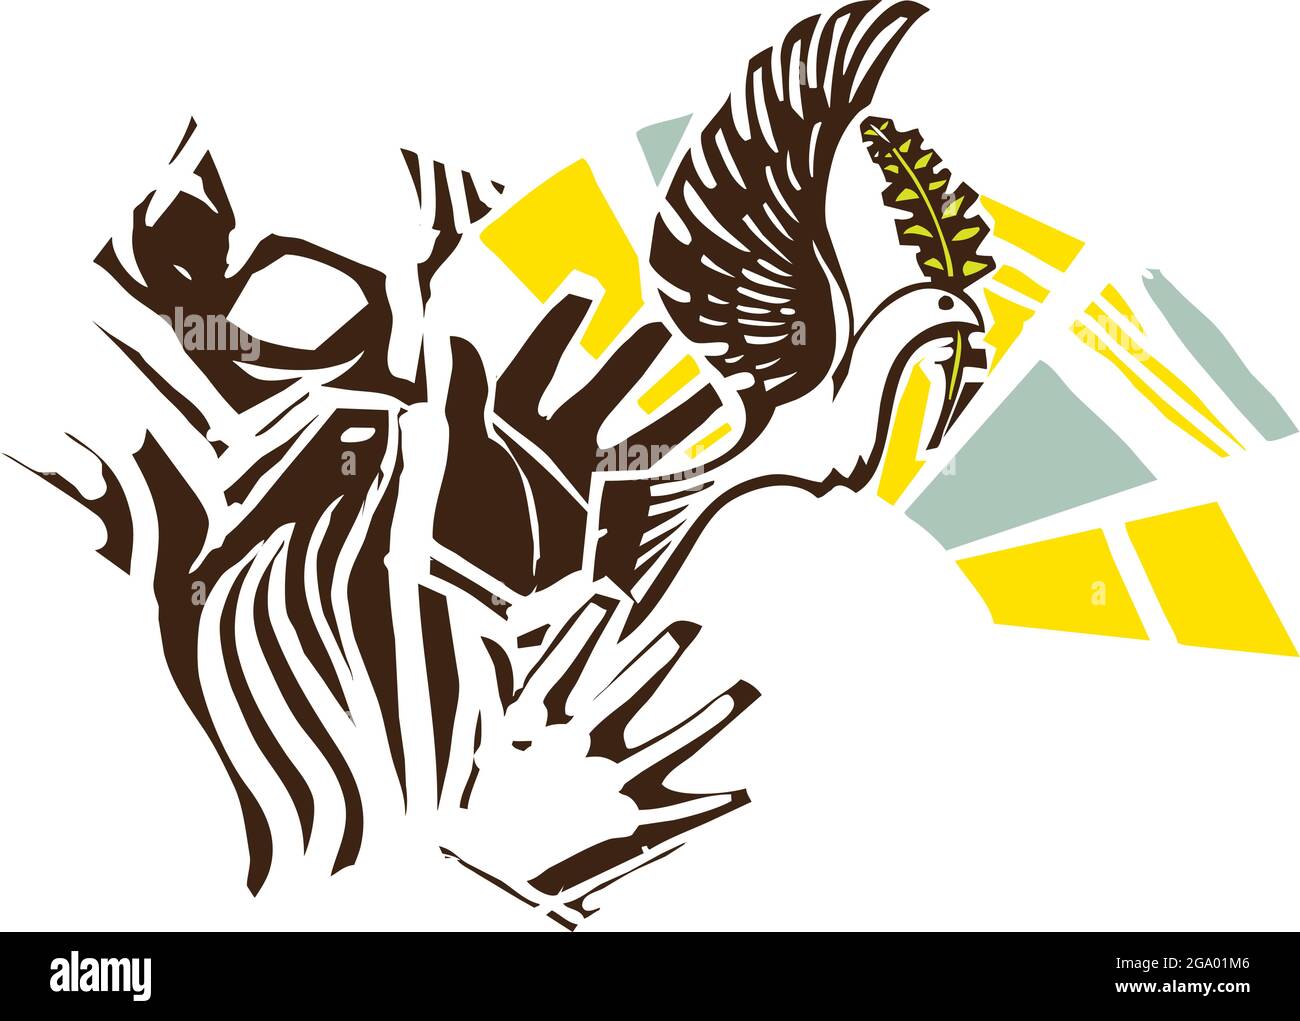 Woodcut expressionist style dove of peace flying from an old man's hands carrying an olive branch Stock Vector